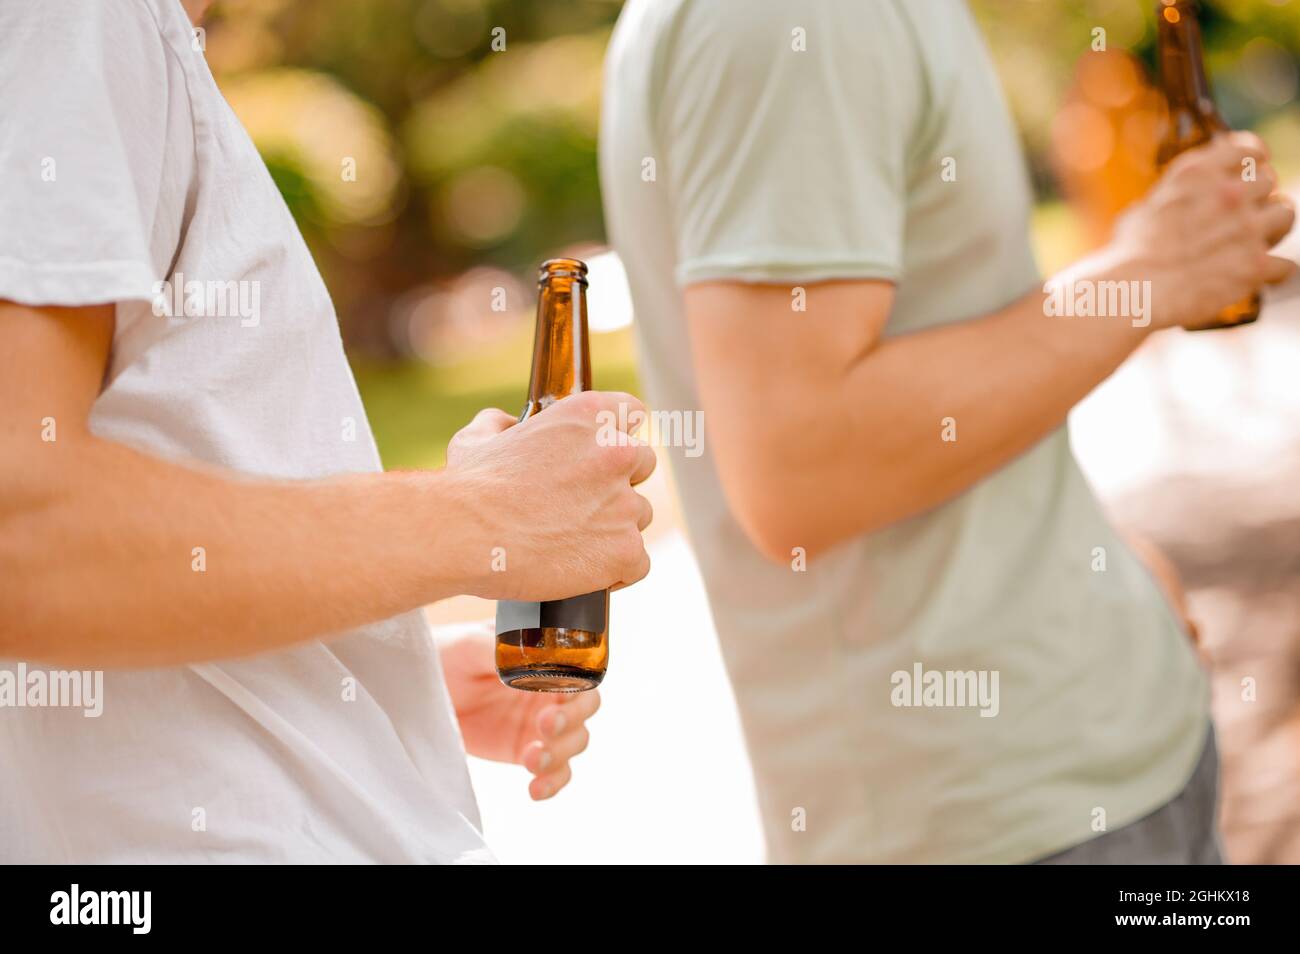 Male hand holding open bottle outdoors Stock Photo